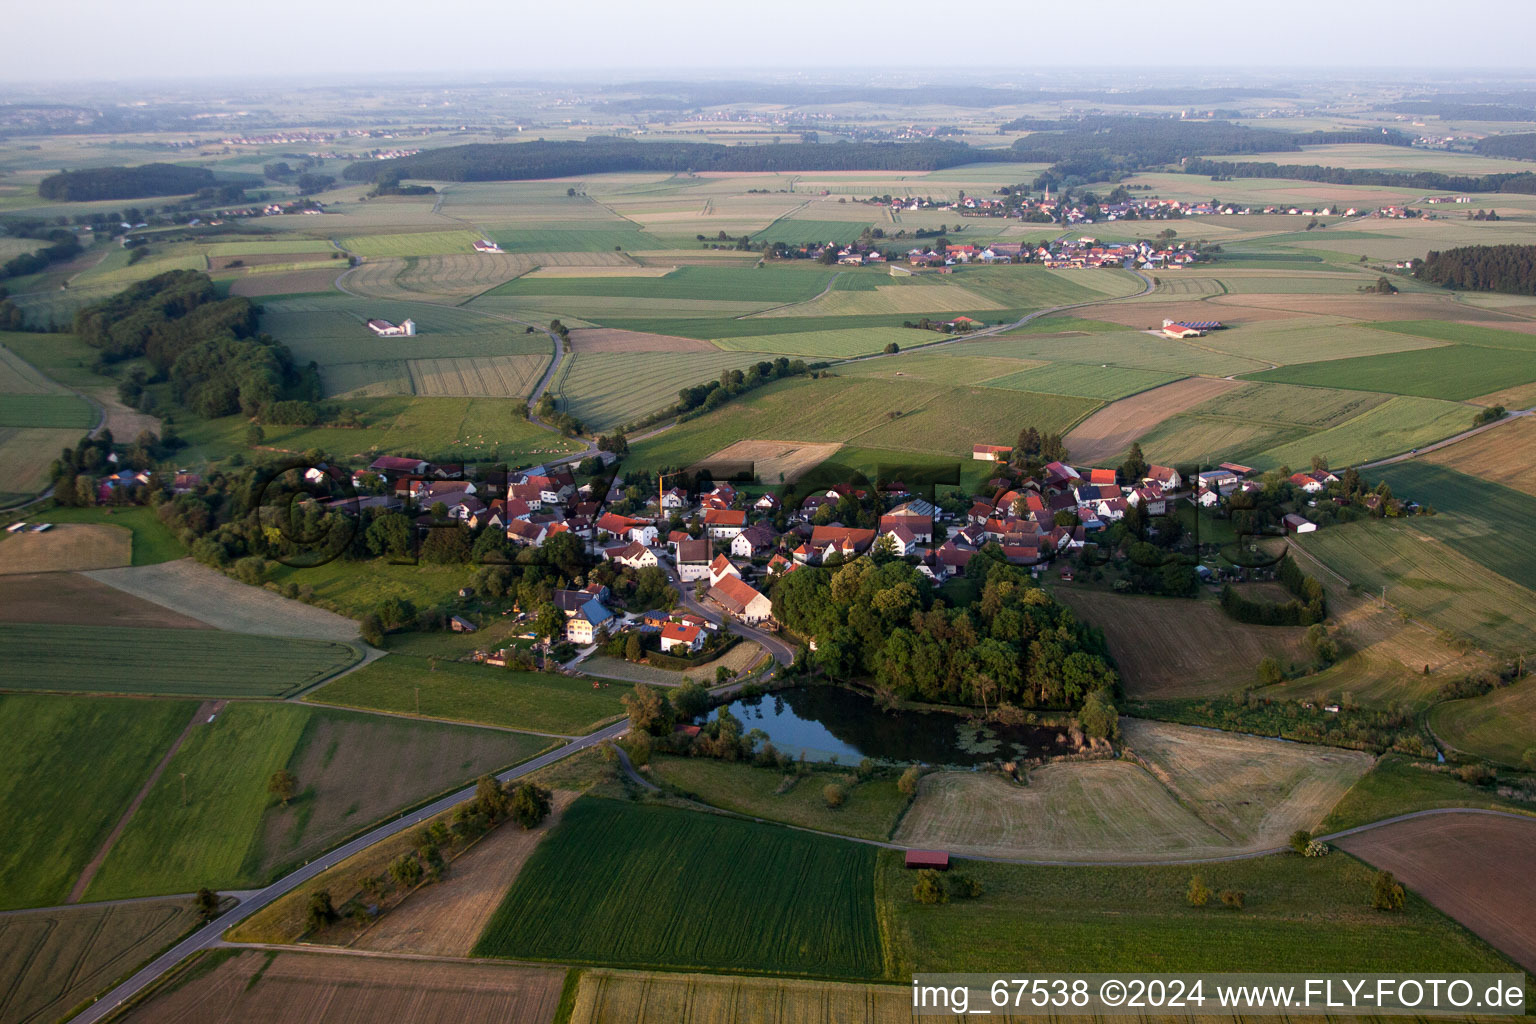 Aerial view of Village view in the district Uigendorf in Unlingen in the state Baden-Wurttemberg